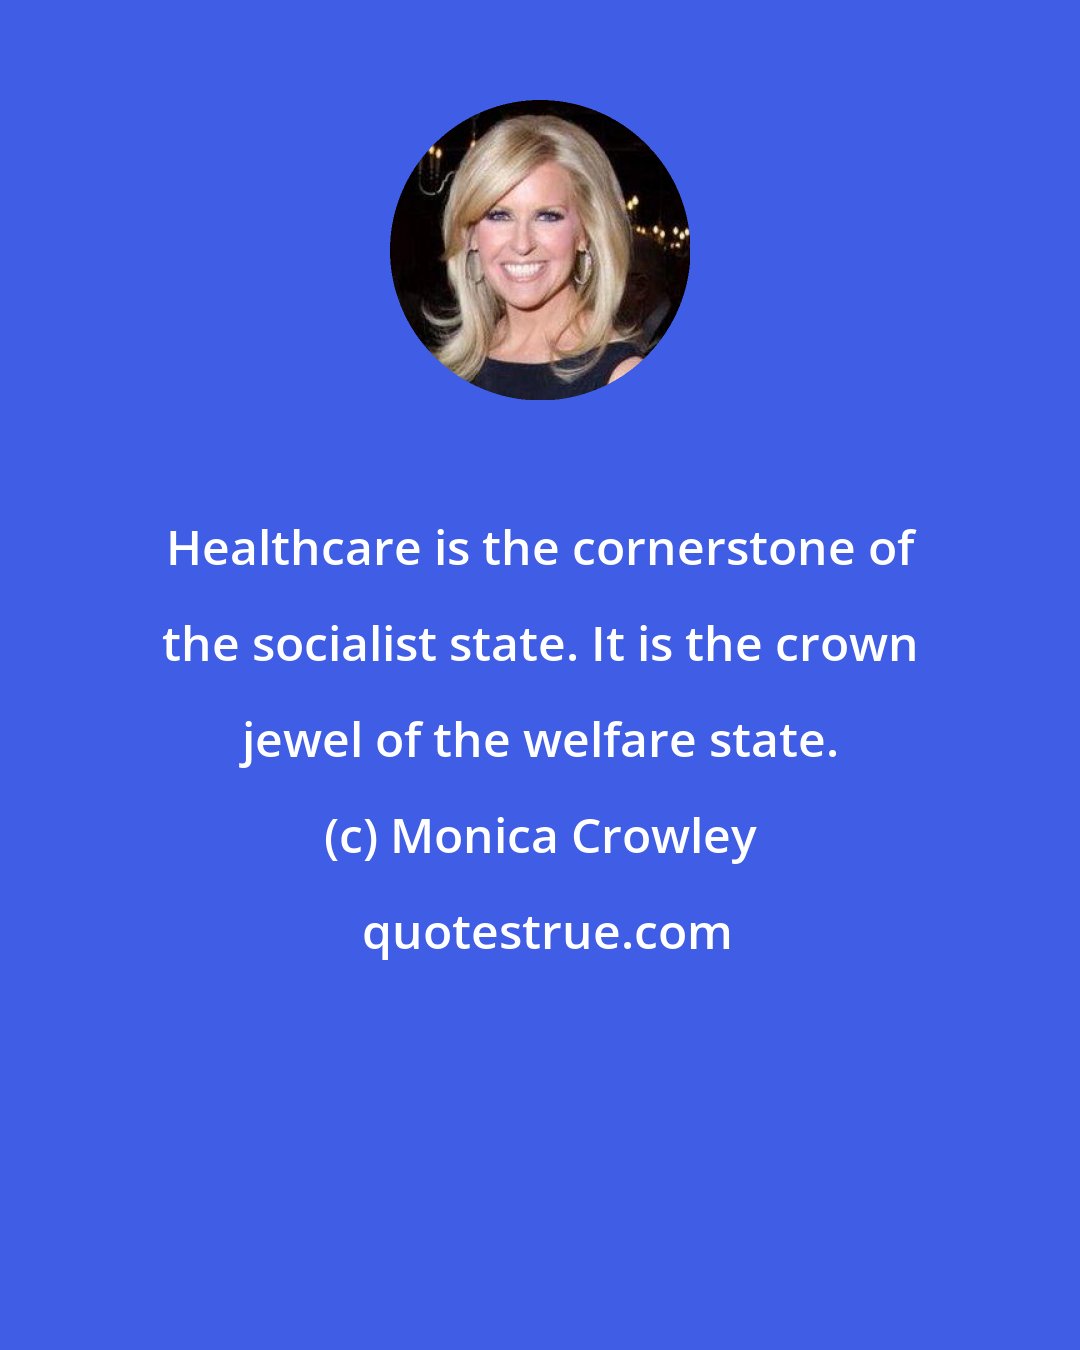 Monica Crowley: Healthcare is the cornerstone of the socialist state. It is the crown jewel of the welfare state.